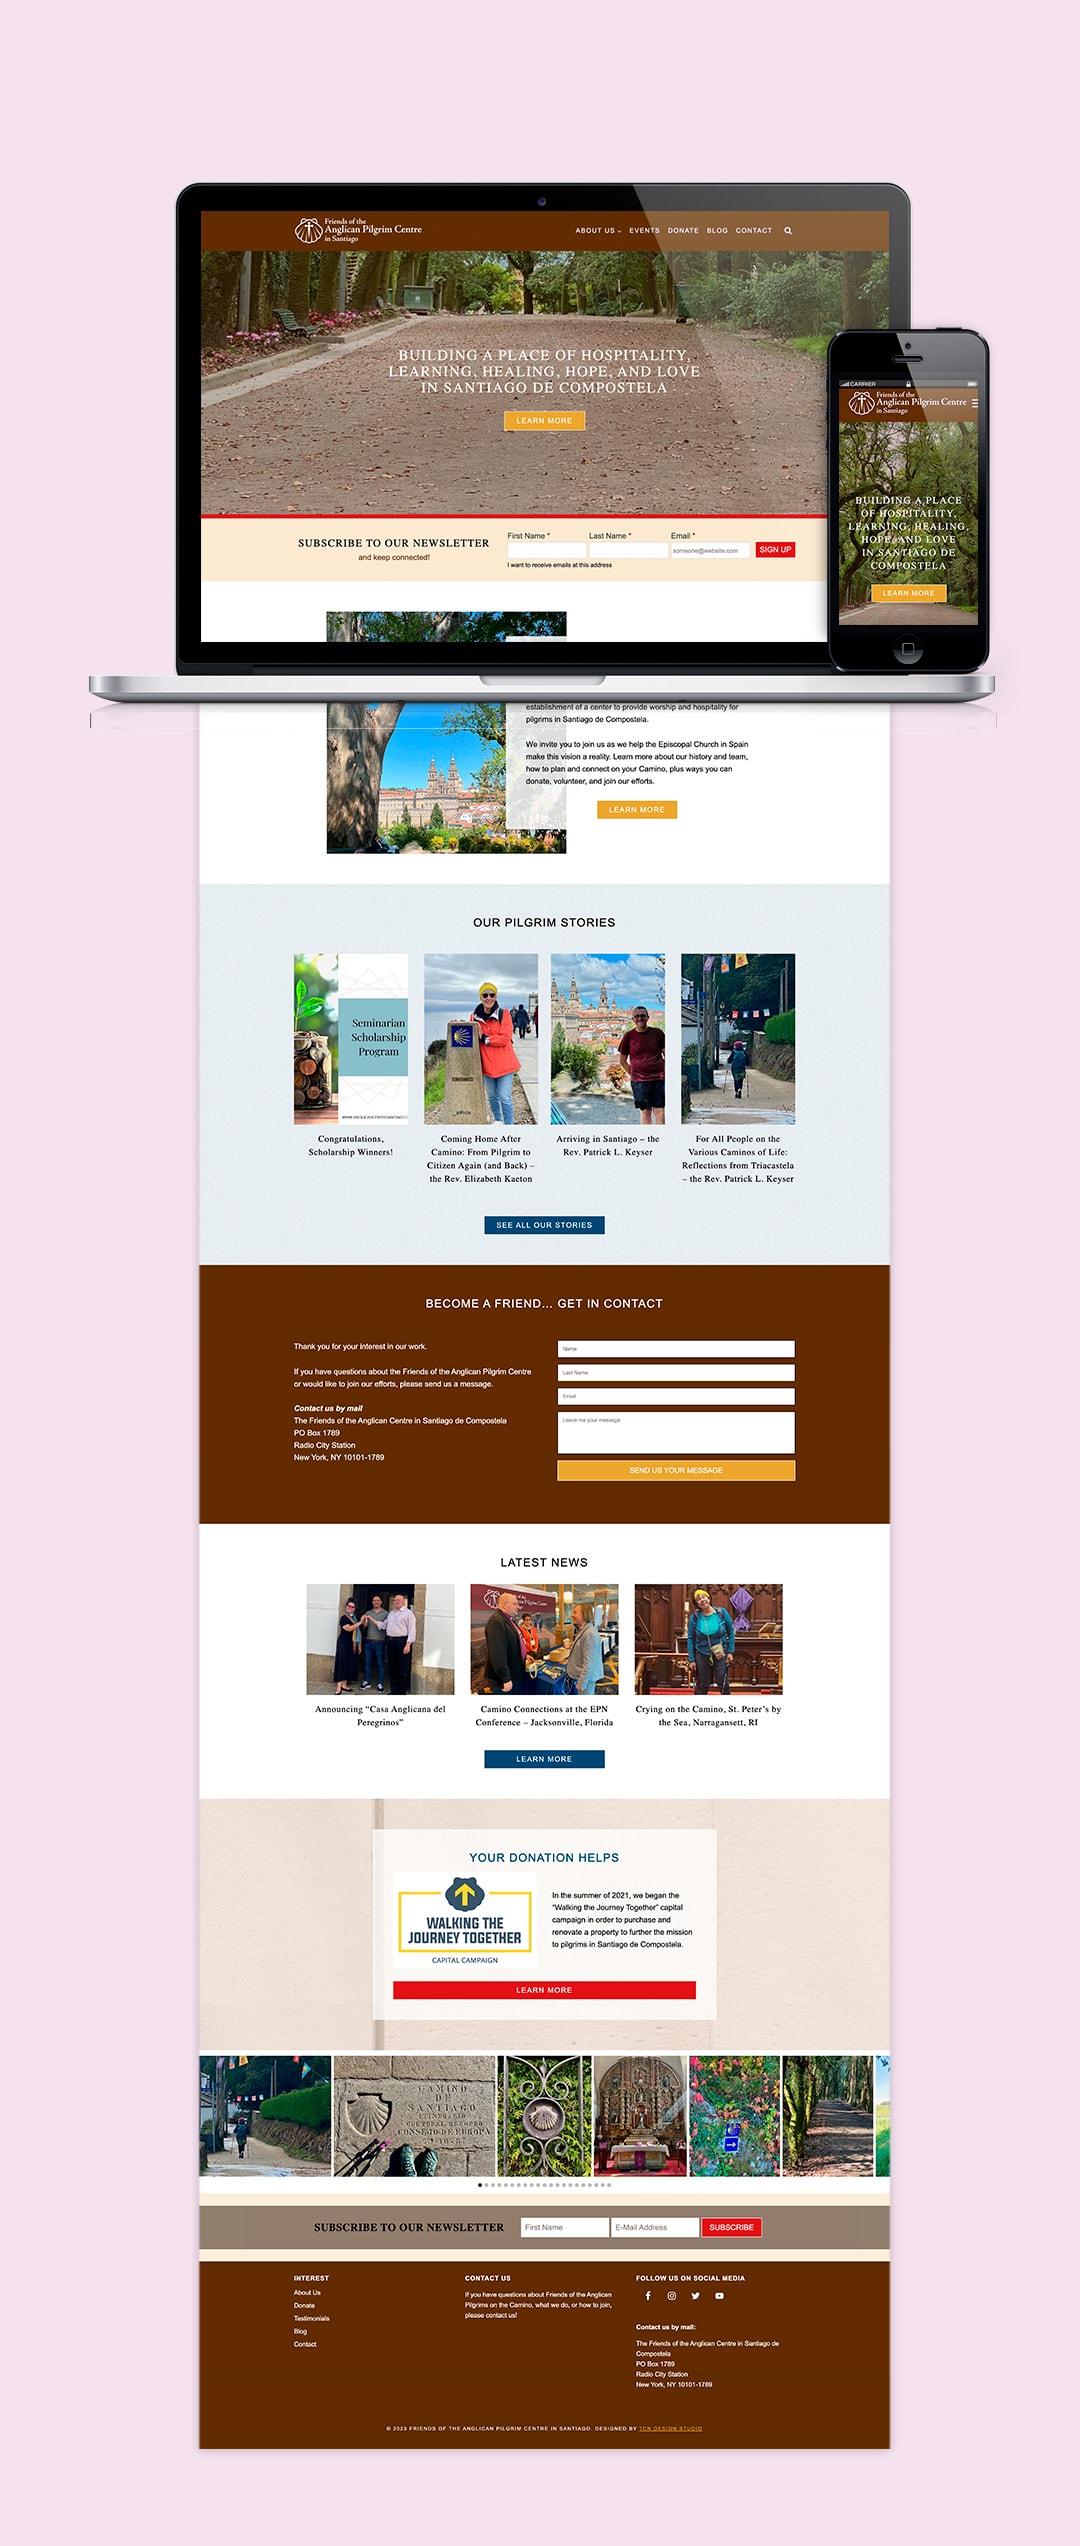 The Homepage of Friends of The Anglican Pilgrim Center's Website Design 2022